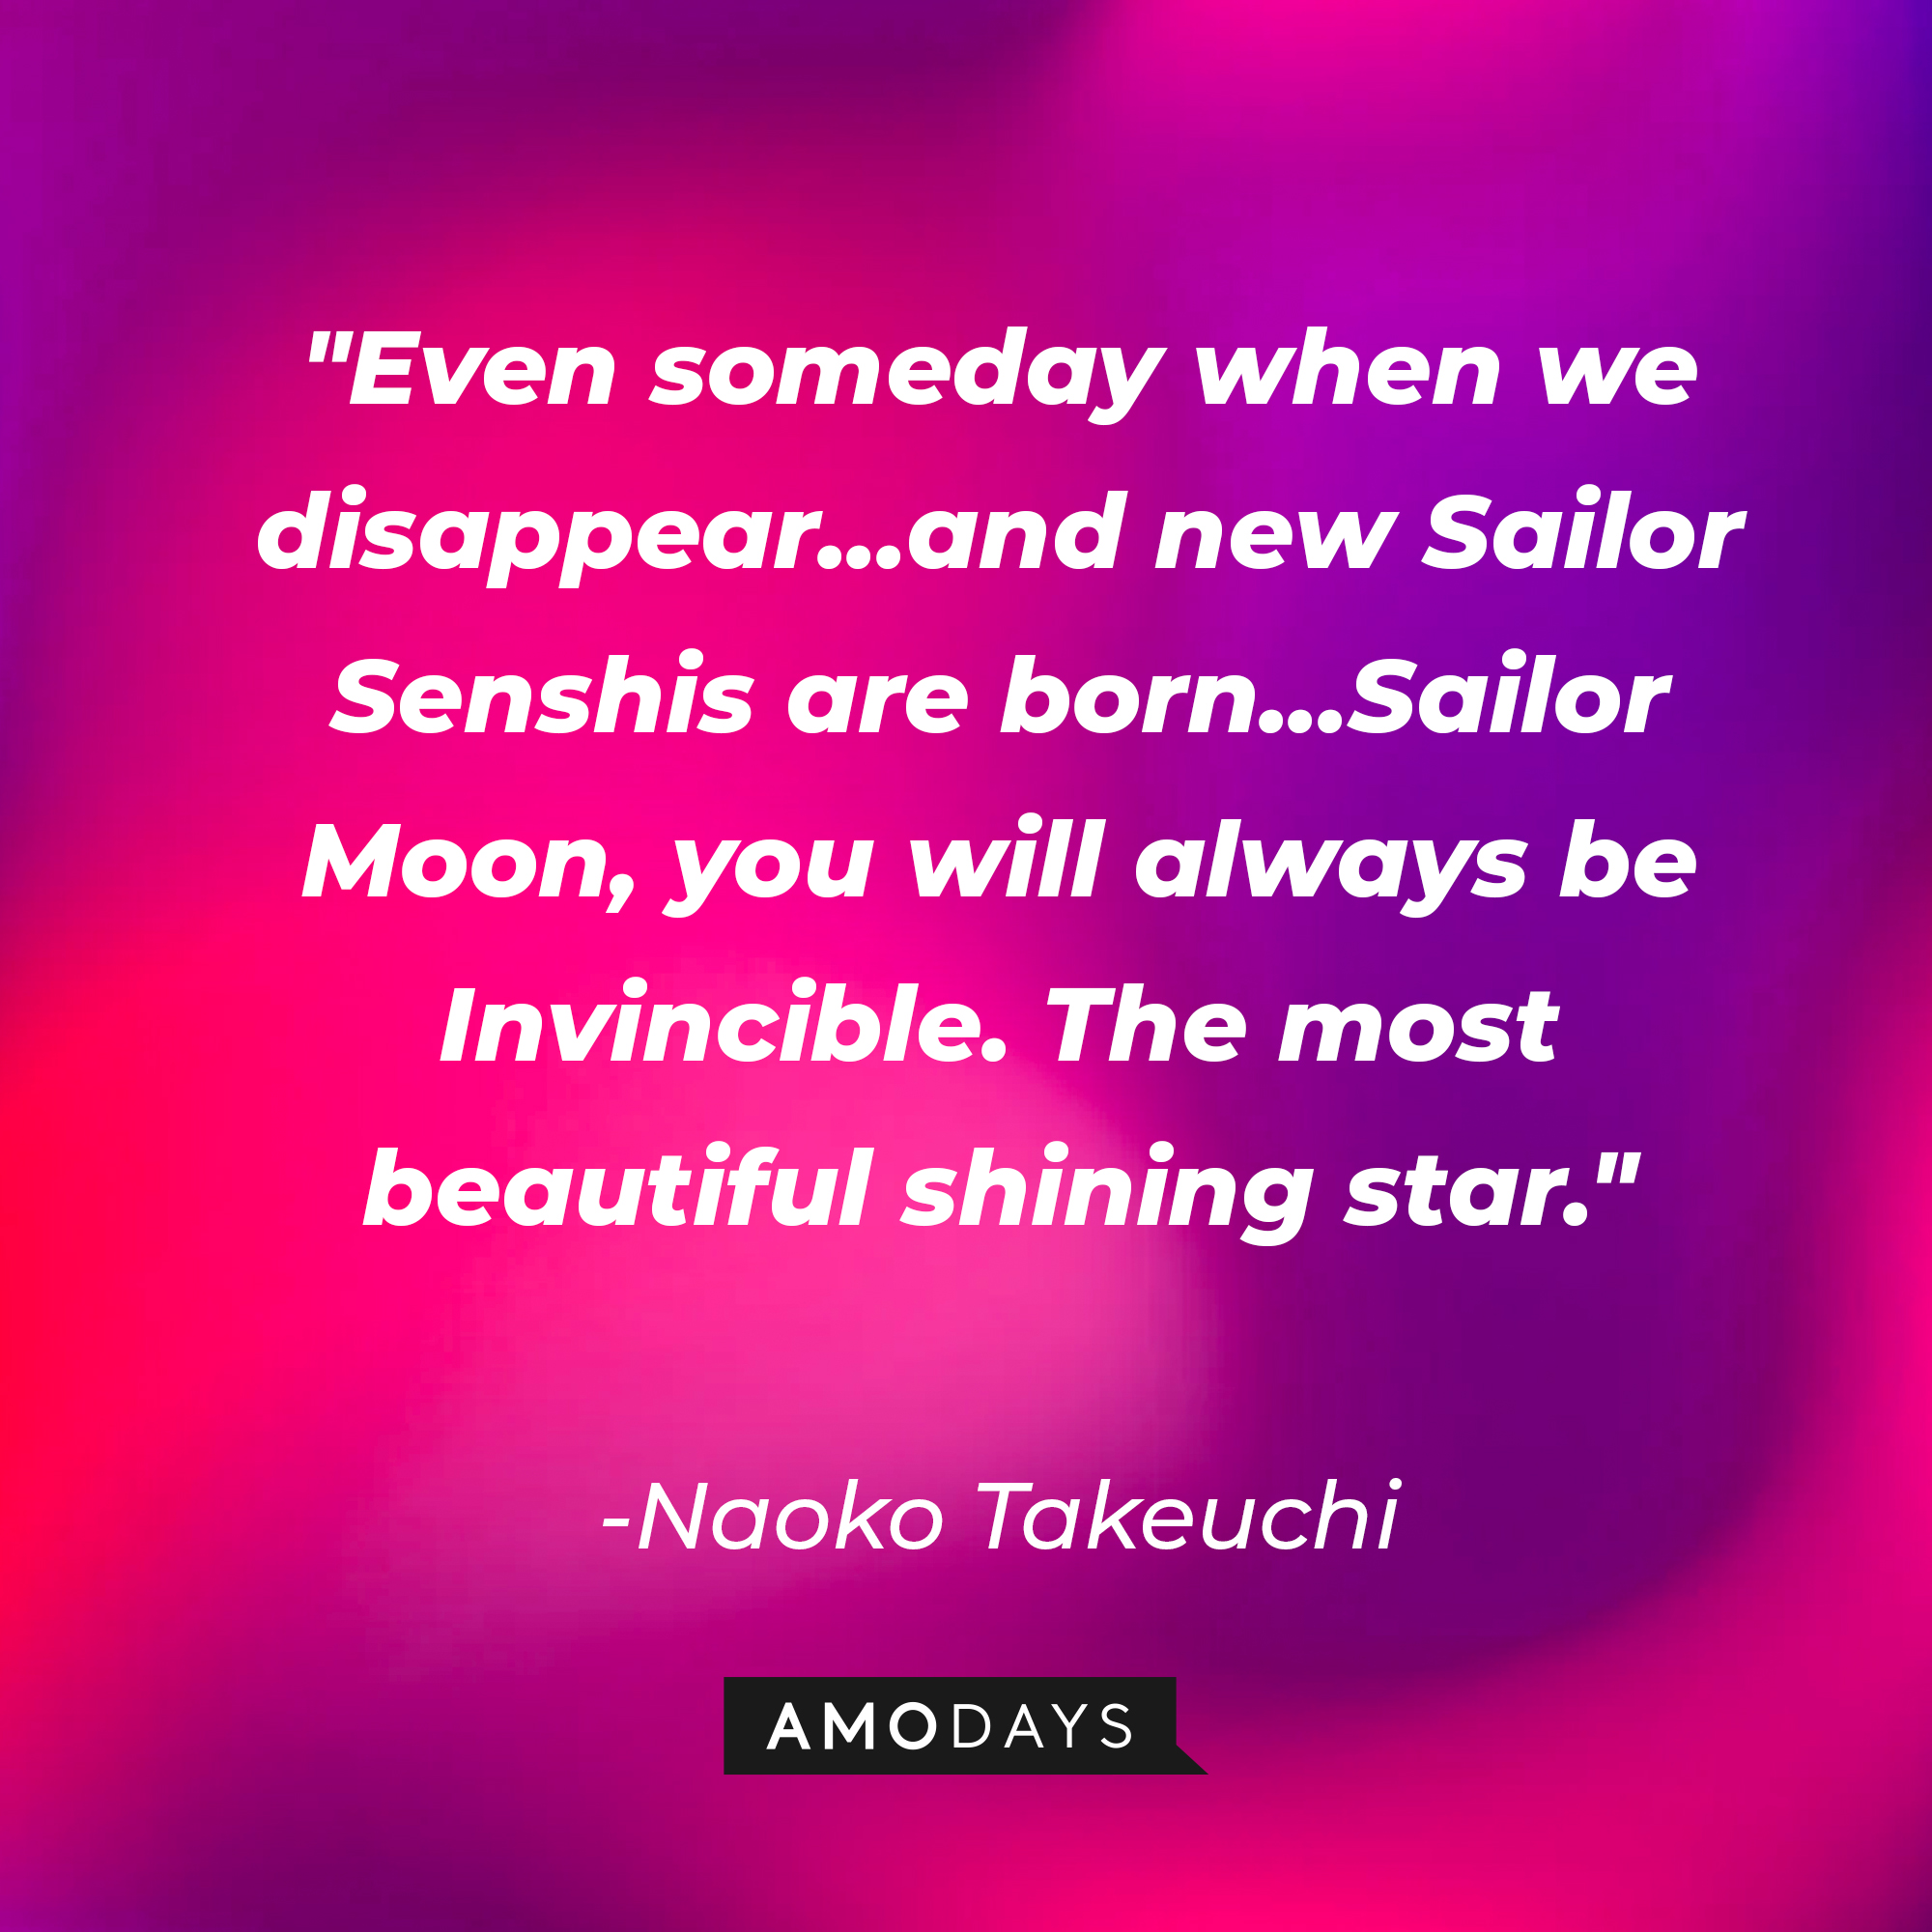 Naoko Takeuchi's quote: "Even someday when we disappear... and new Sailor Senshis are born... Sailor Moon, you will always be Invincible. The most beautiful shining star." | Image: AmoDays